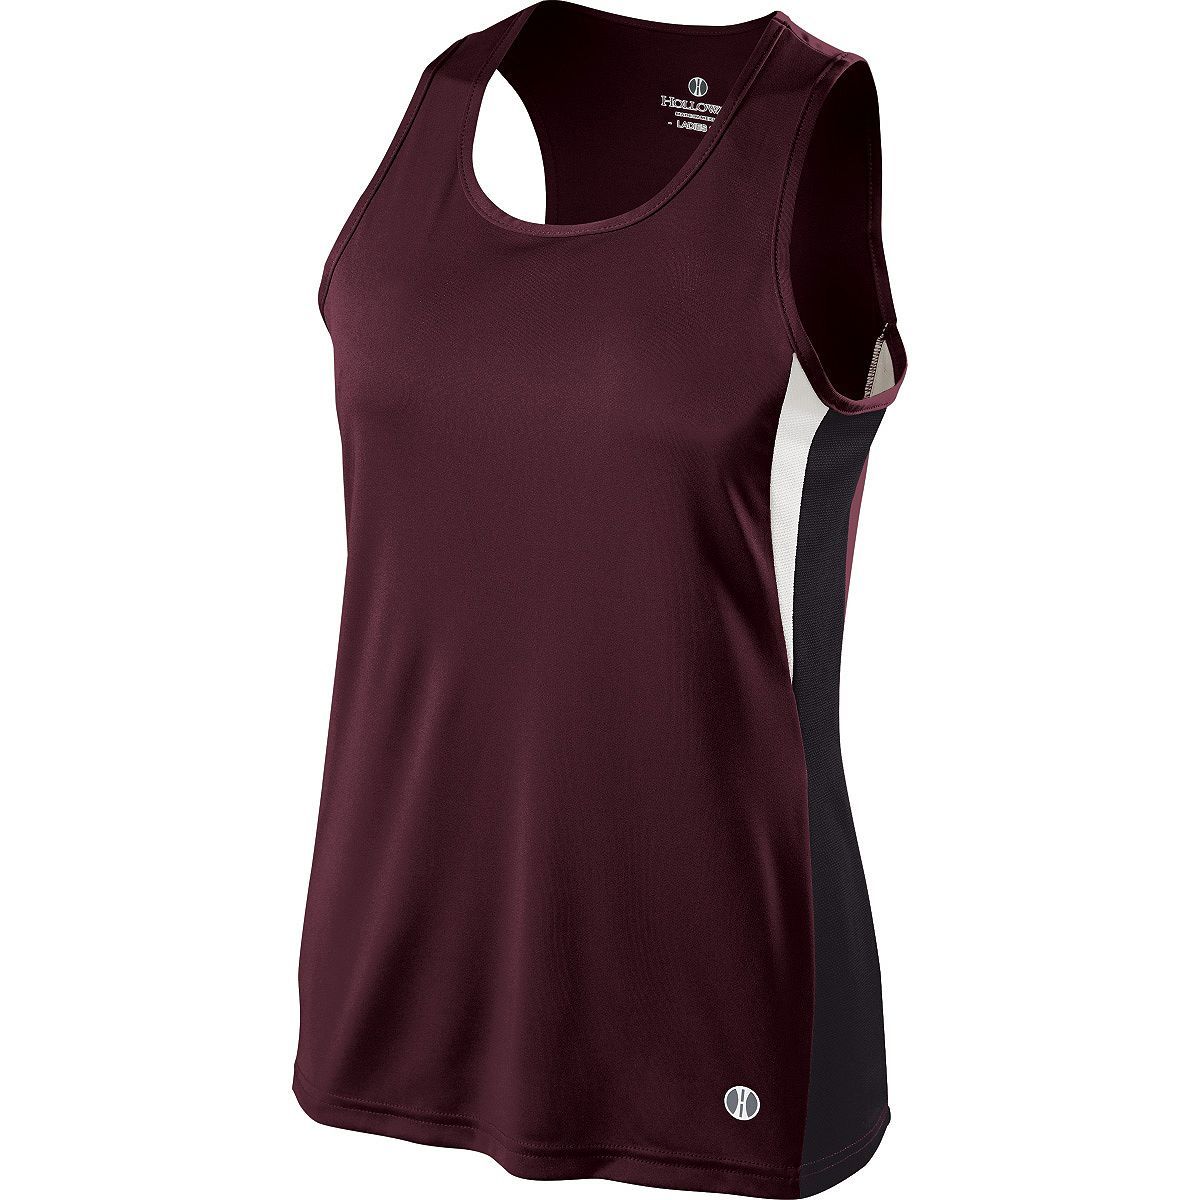 Holloway Ladies Vertical Singlet in Dark Maroon/Black/White  -Part of the Ladies, Track-Field, Holloway, Shirts product lines at KanaleyCreations.com